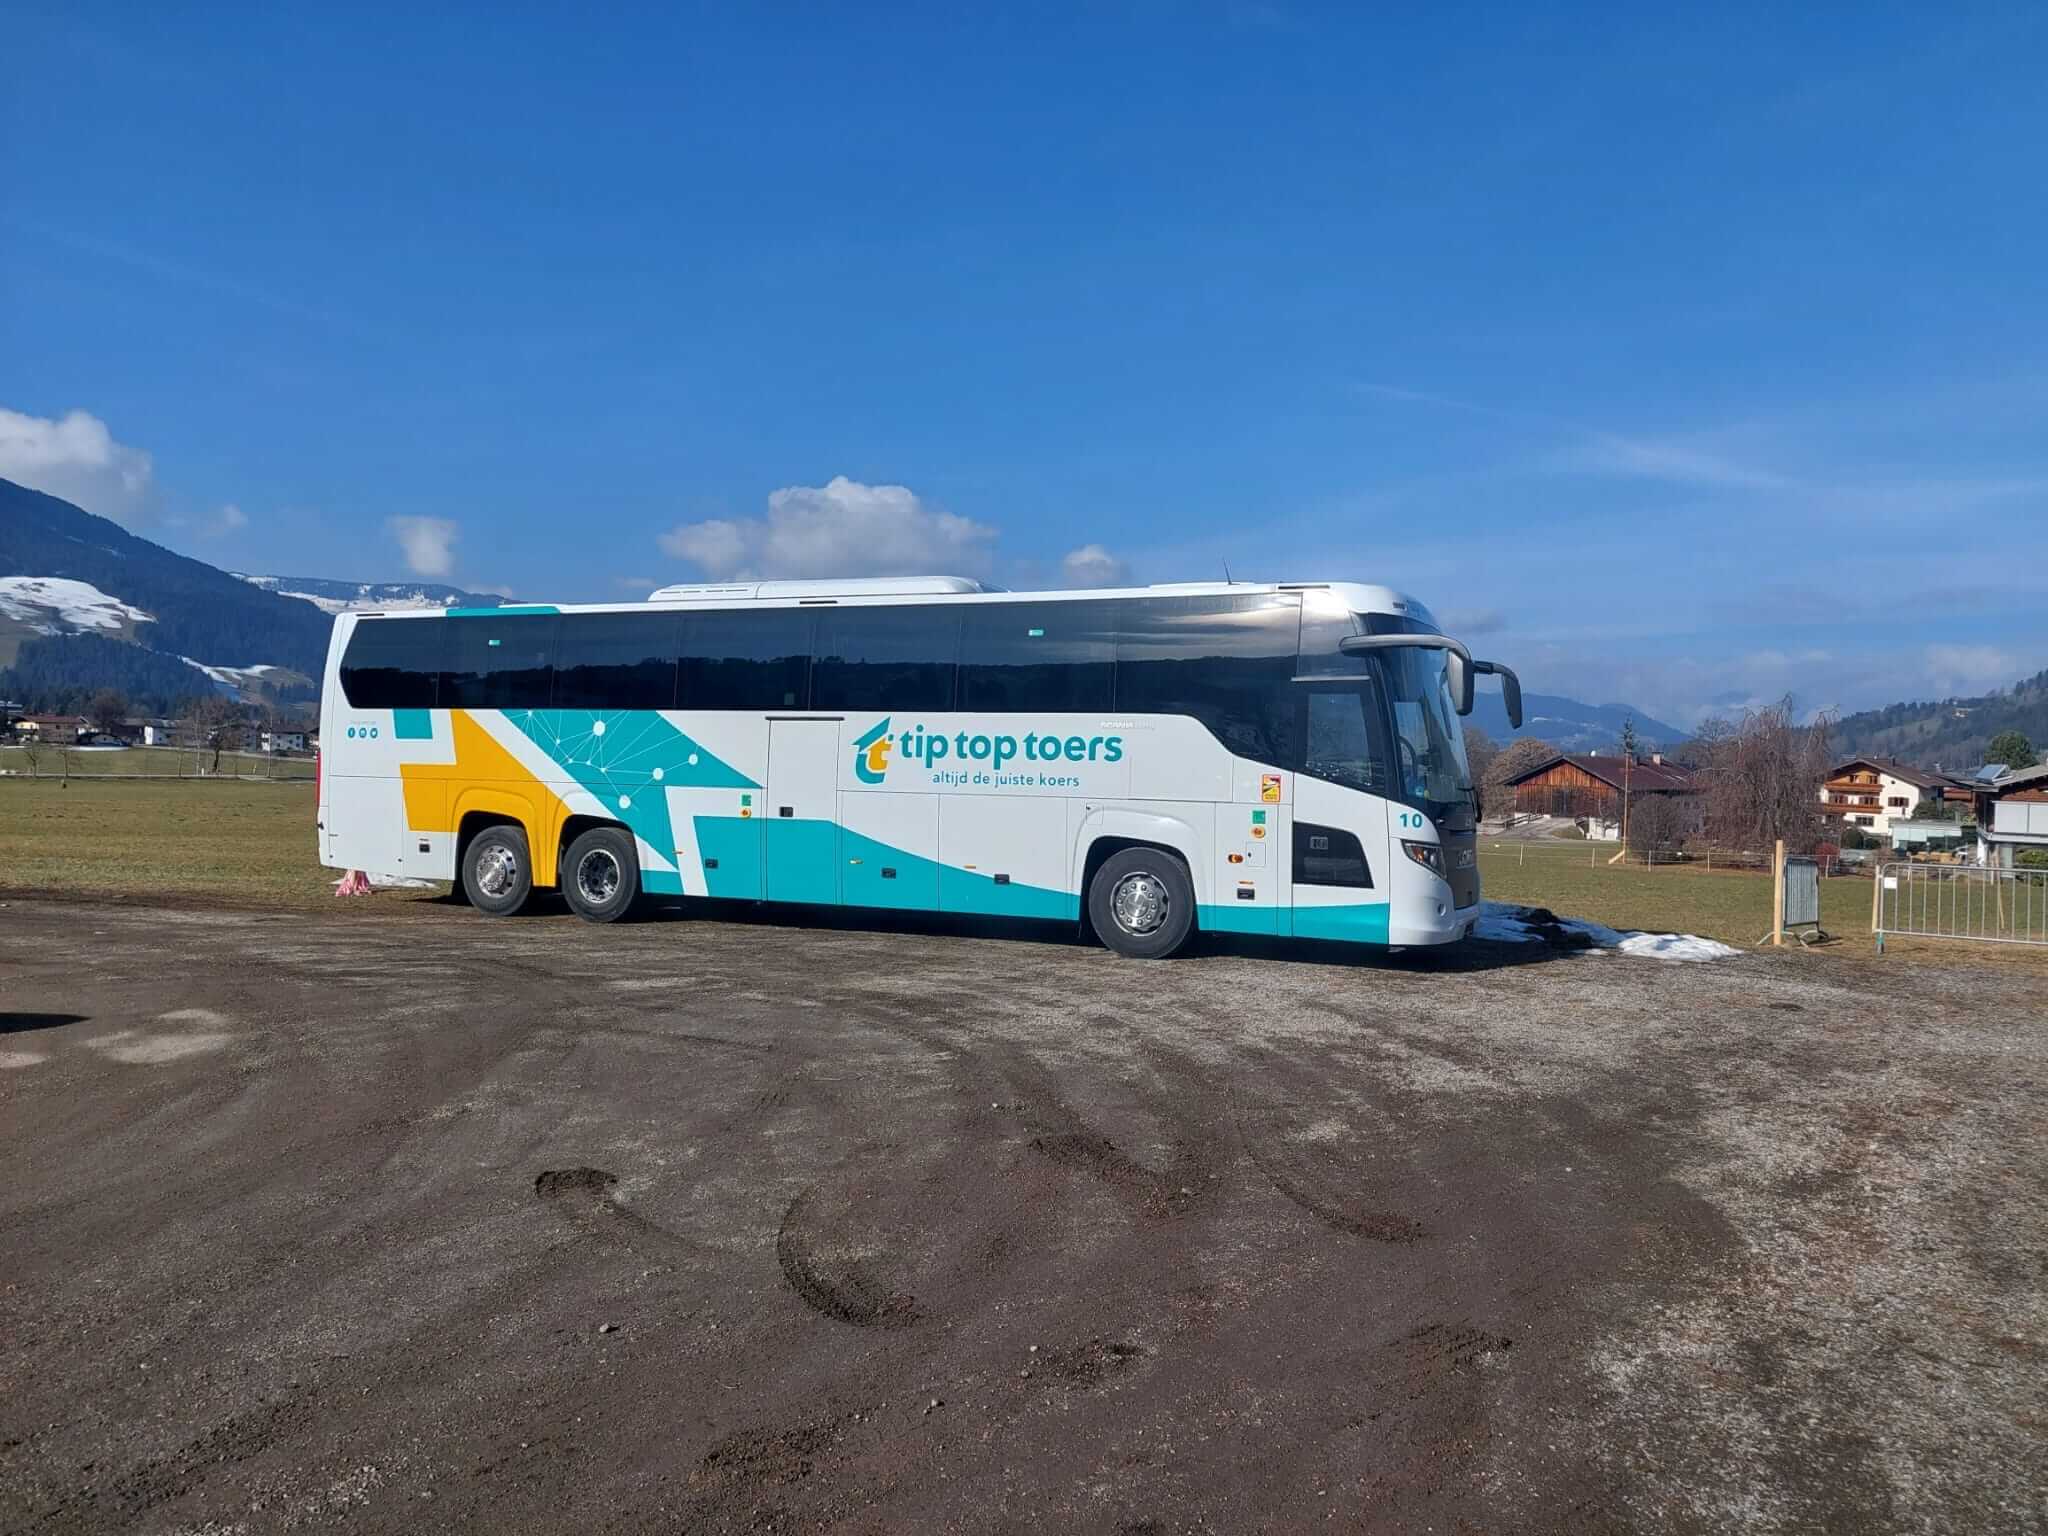 Rent a 60 seater Standard Coach (Scania Touring 2022) from Tip Top Toers from Almere - Buiten 